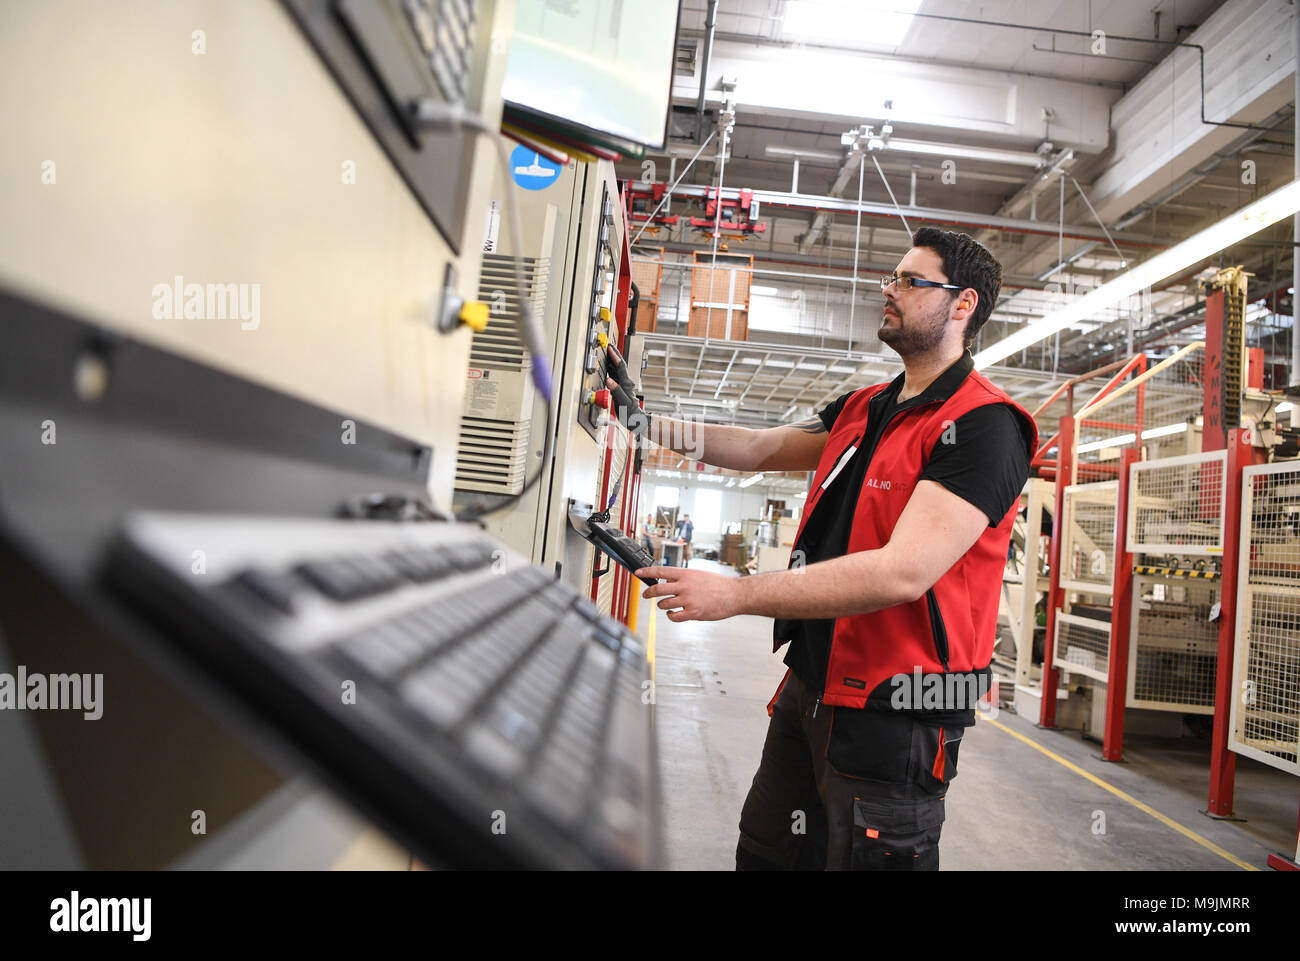 27 March 2018, Germany, Pfullendorf: An employee of kitchen manufacturer Neue Alno GmbH operating a machine that cuts plates for kitchens. The kitchen manufacturer has kicked off mass production after its acquisition by British investor Riverrock. Photo: Felix Kästle/dpa Stock Photo